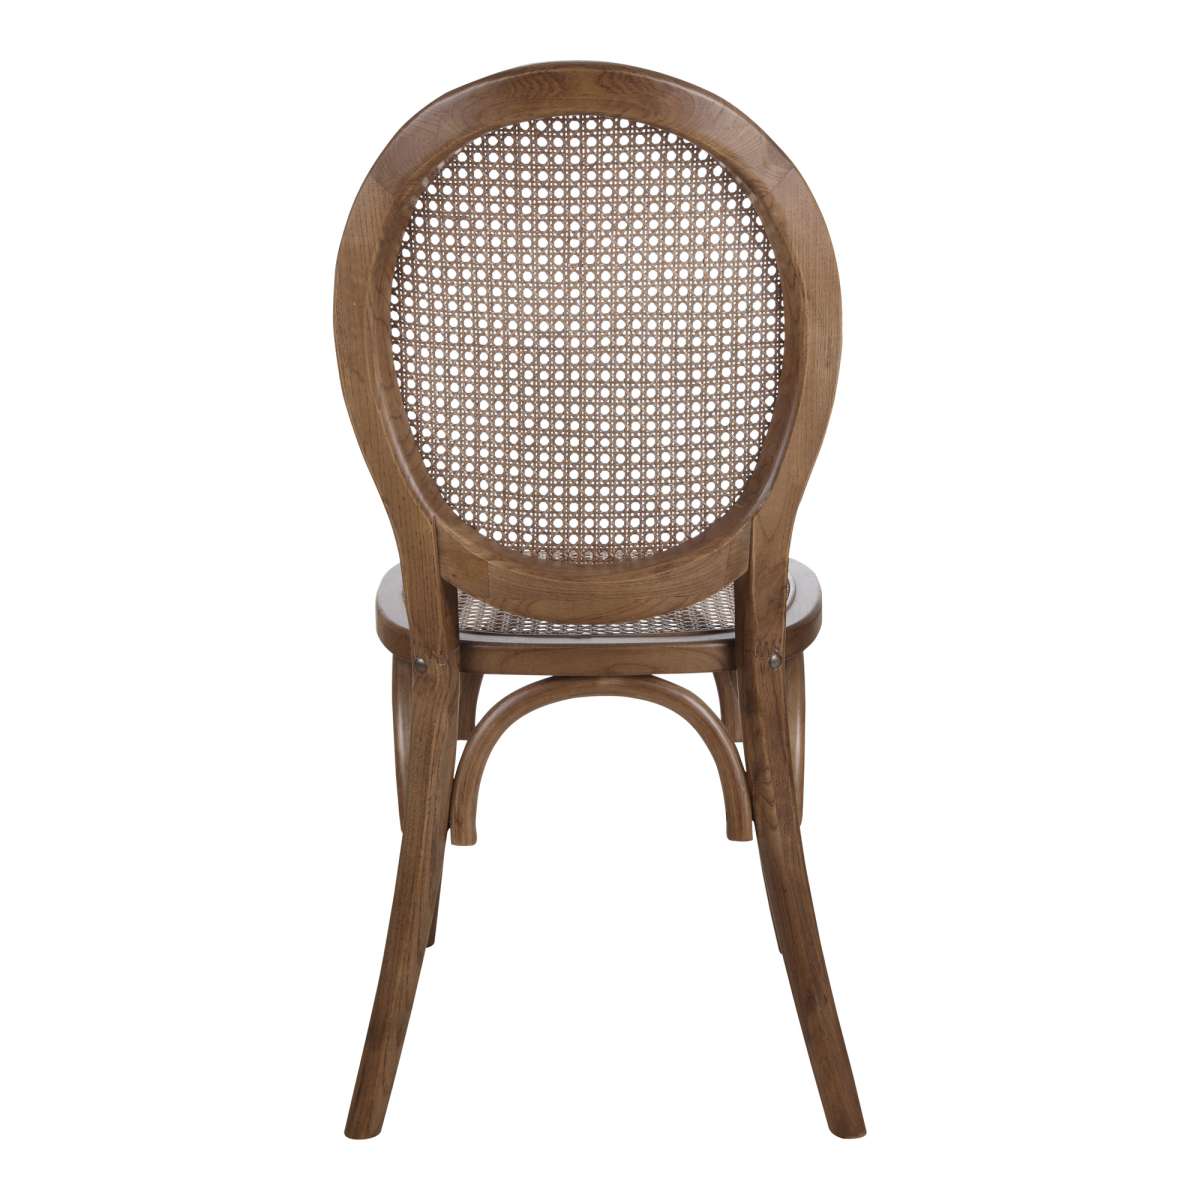 Rivalto Dining Chair-M2 (Set Of 2) By Moe's Home Collection